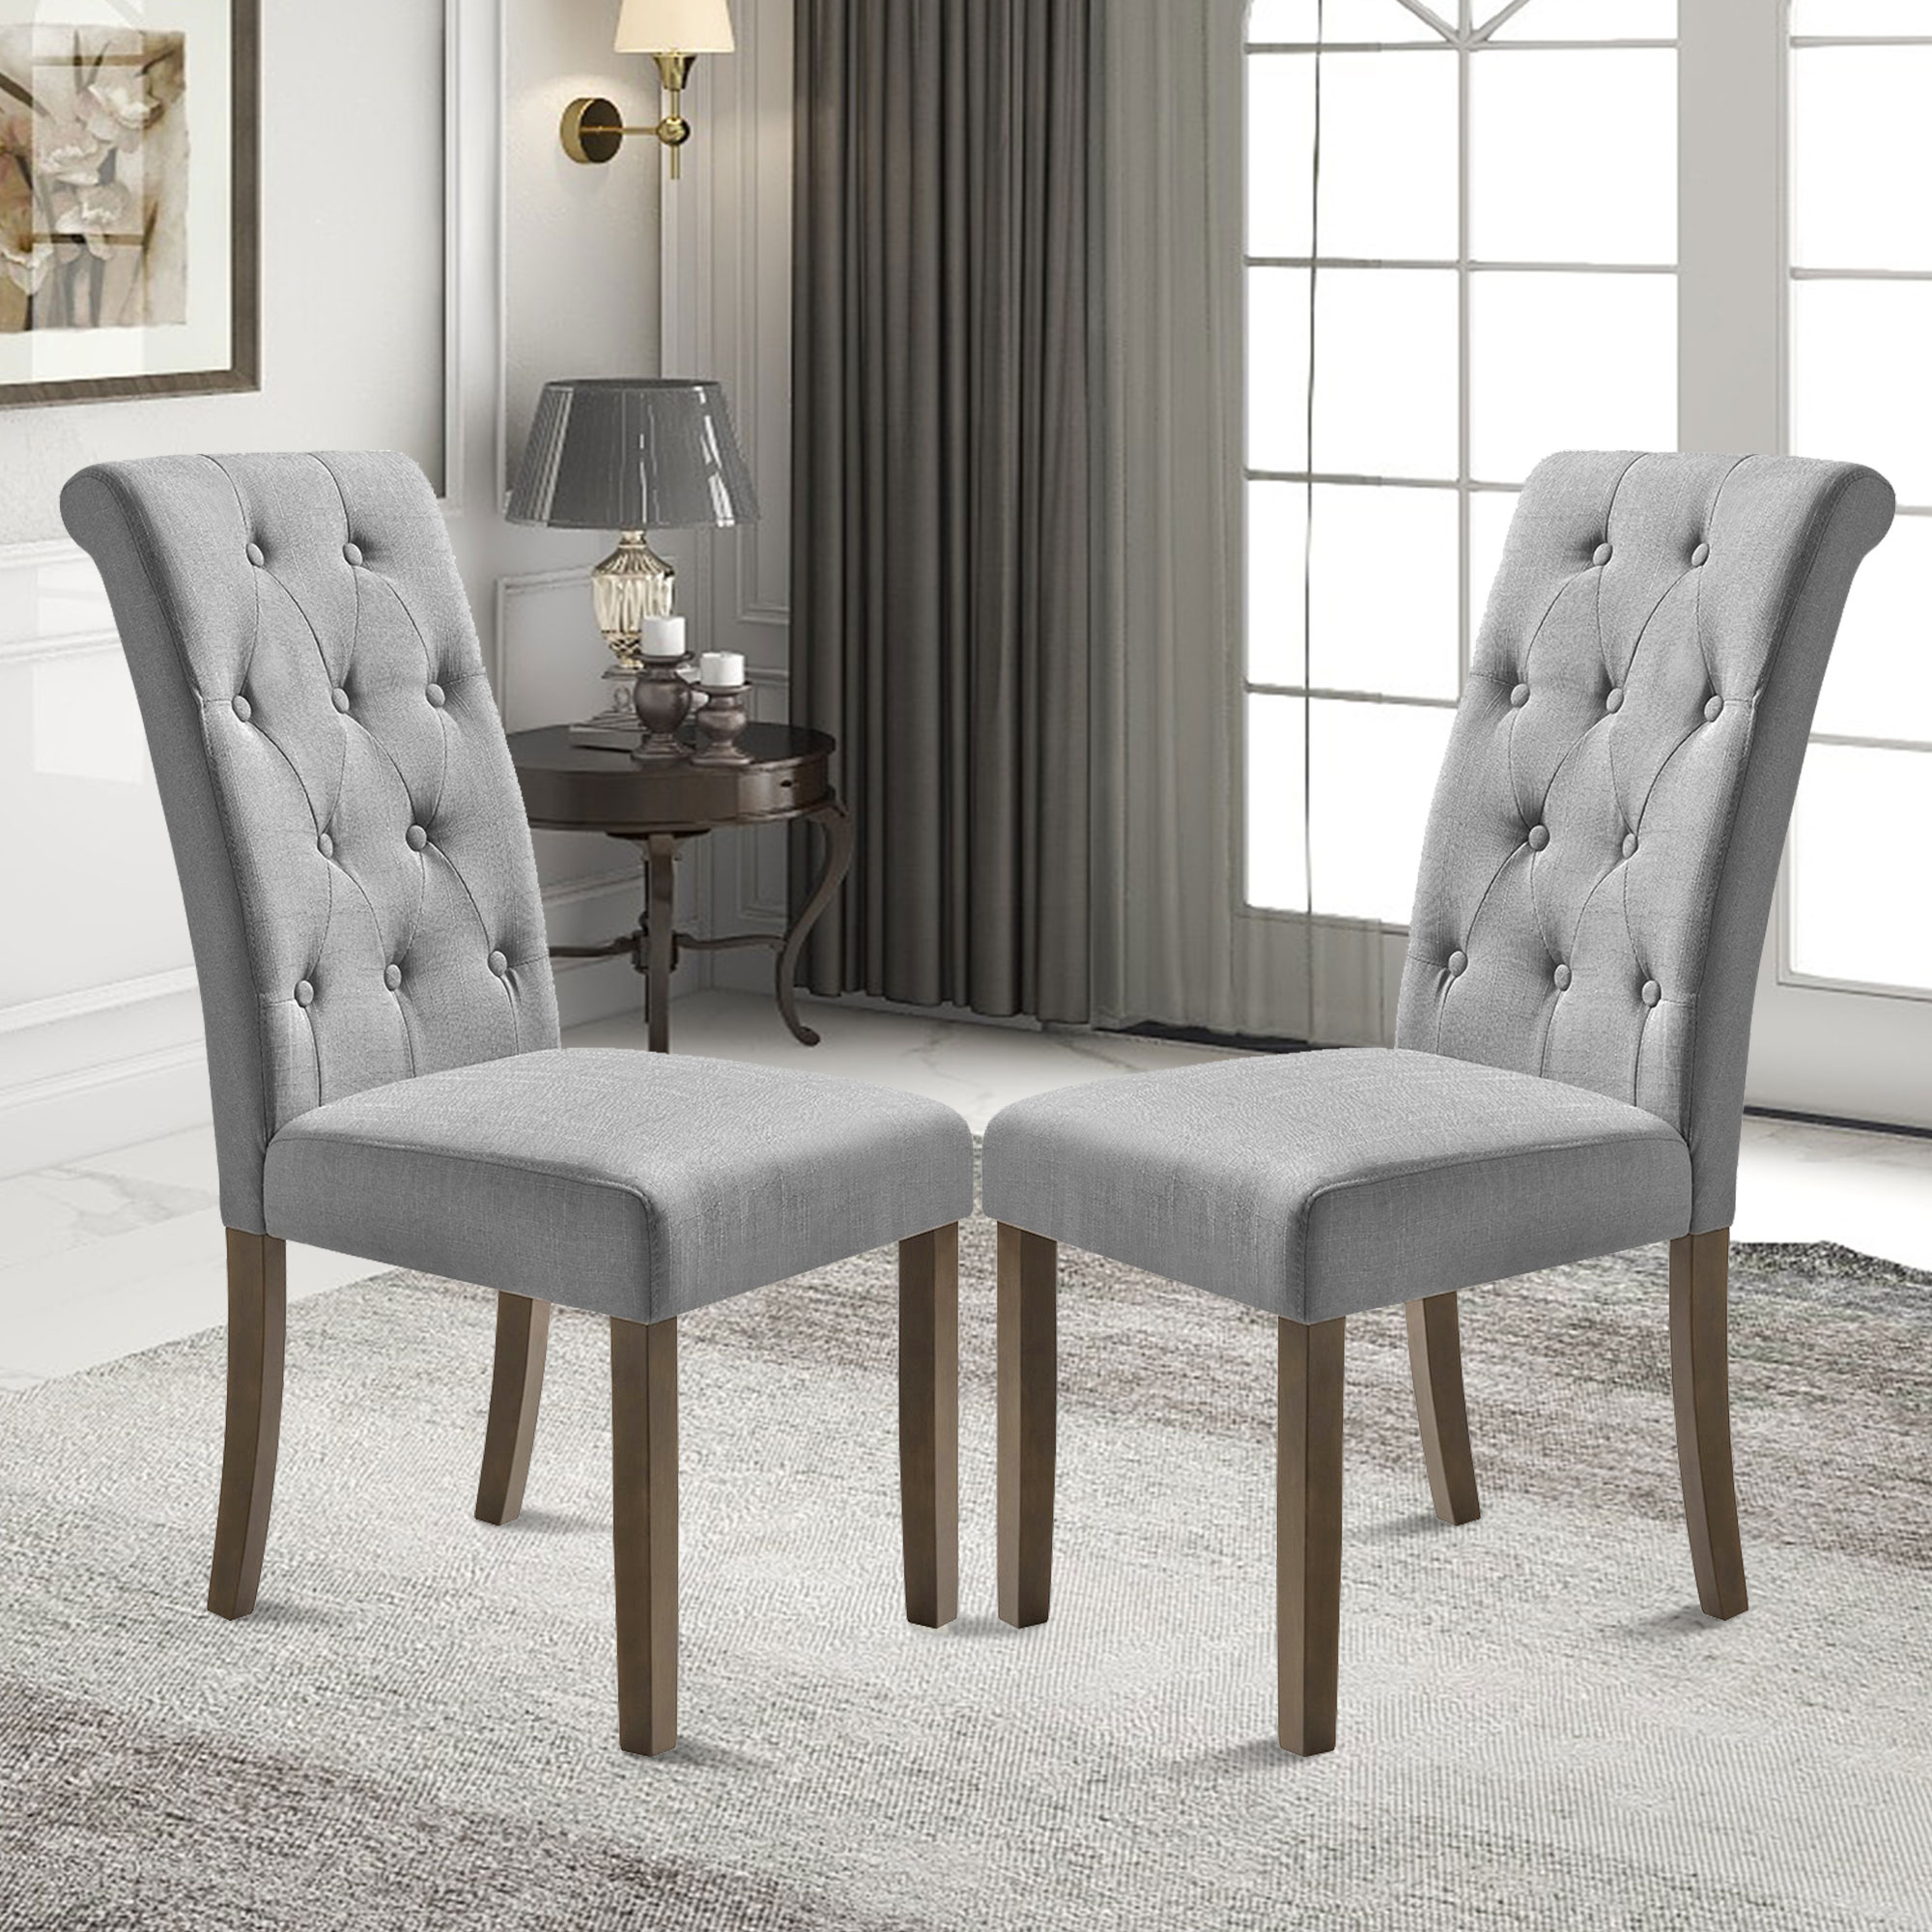 Orisfur. Aristocratic Style Dining Chair Noble and Elegant Solid Wood Tufted Dining Chair Dining Room Set (Set of 2)-Boyel Living